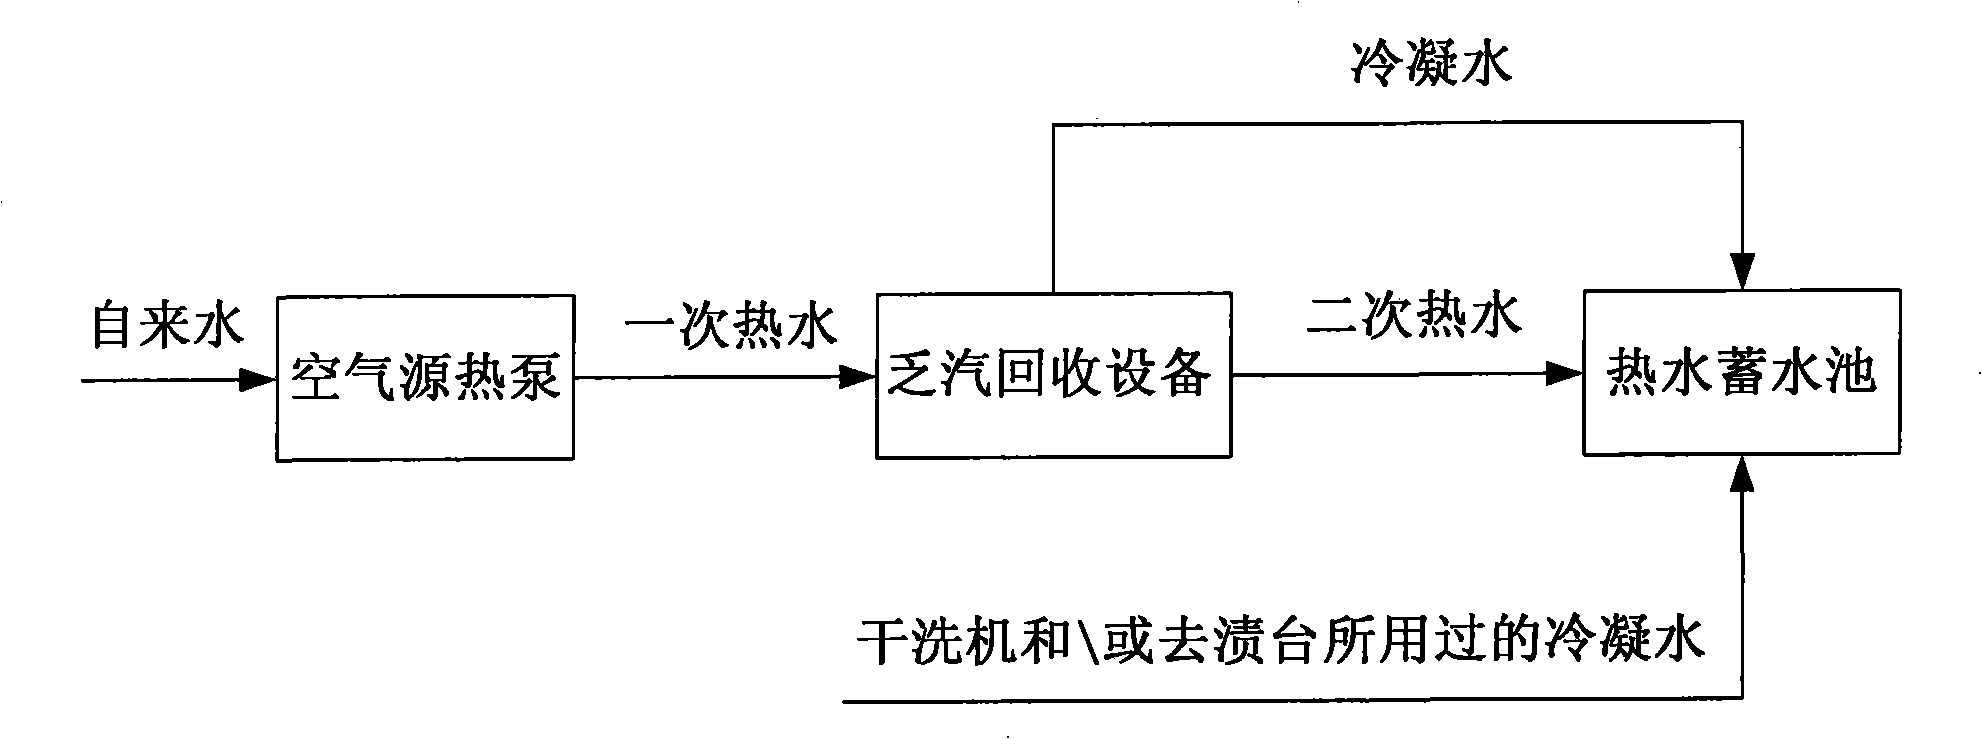 Hot water manufacturing method of air heat source and exhaust steam residual heat complementary